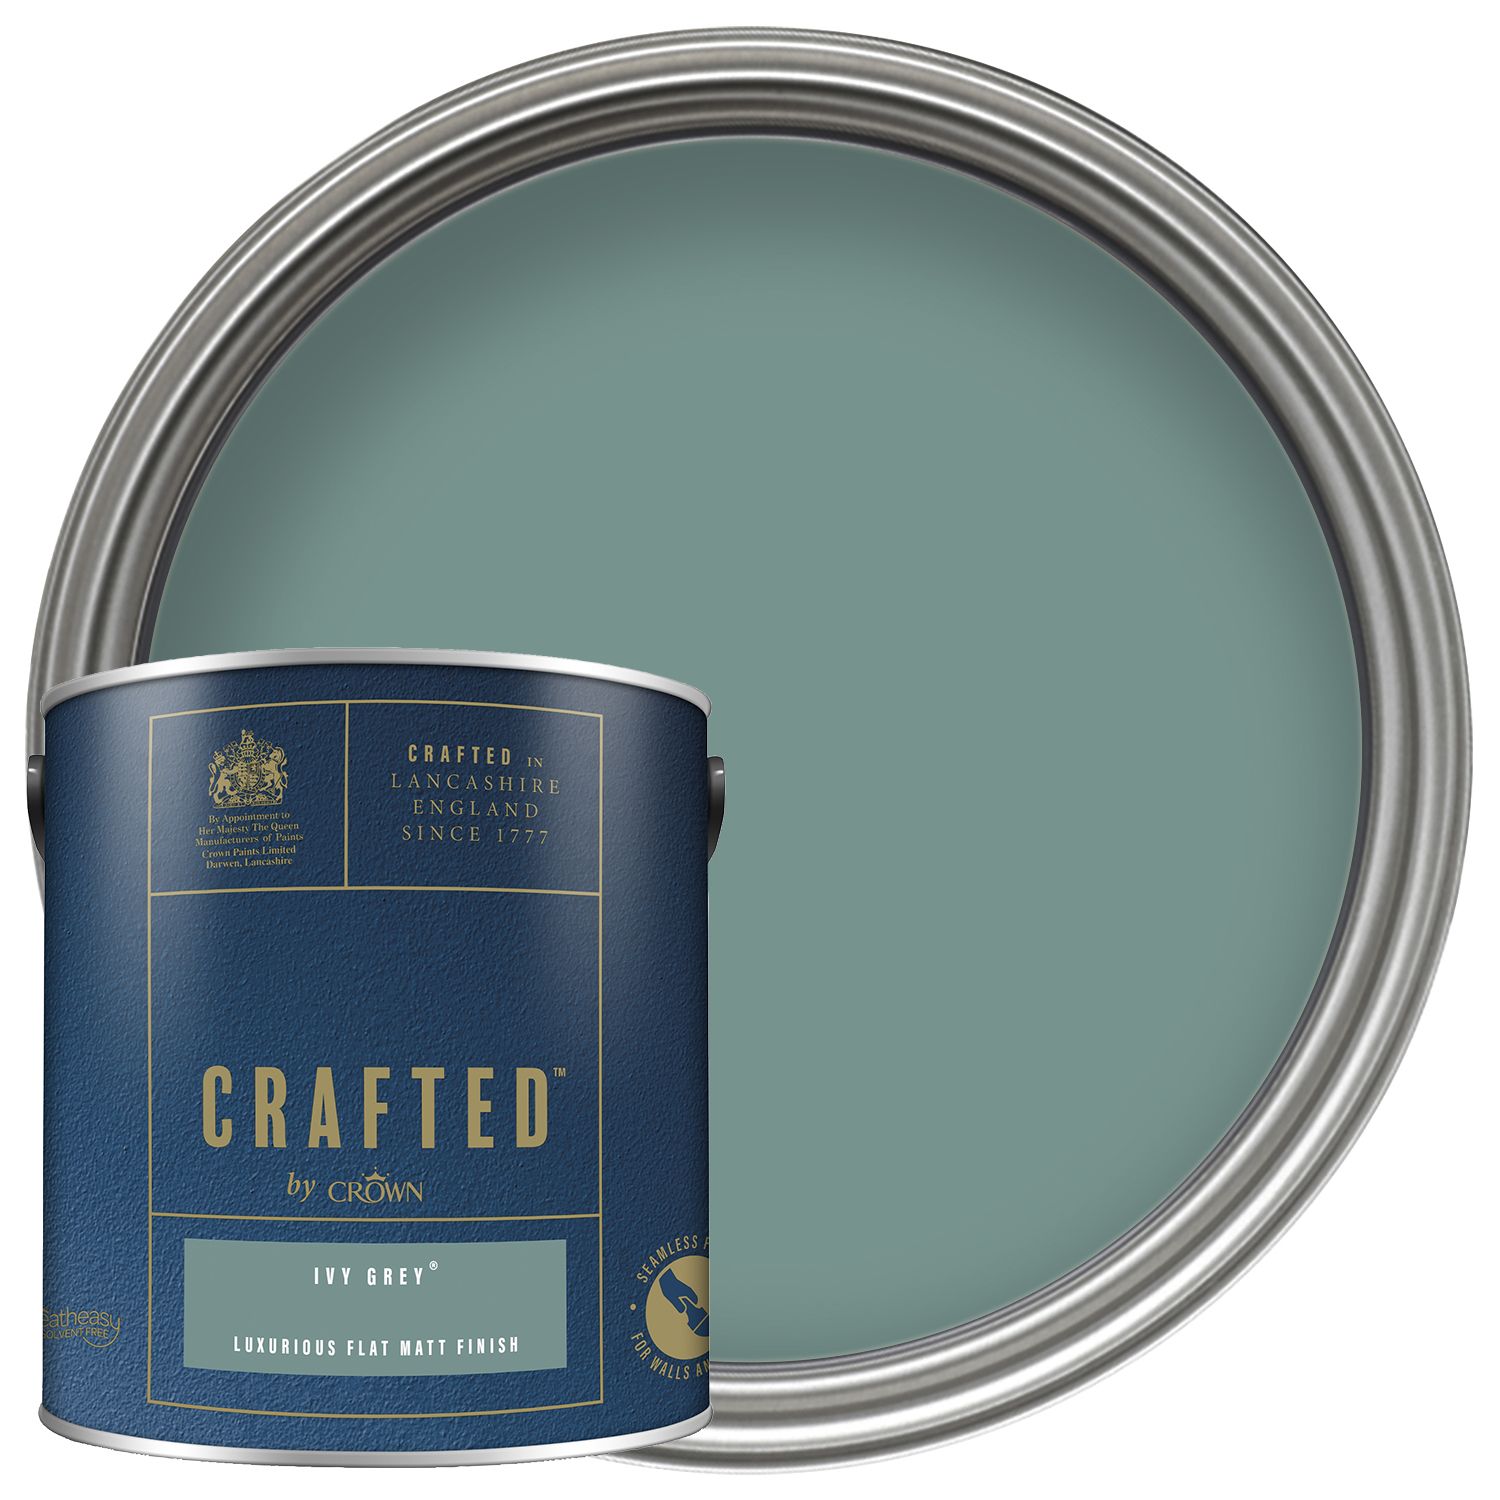 CRAFTED™ by Crown Flat Matt Emulsion Interior Paint - Ivory Grey™ - 2.5L